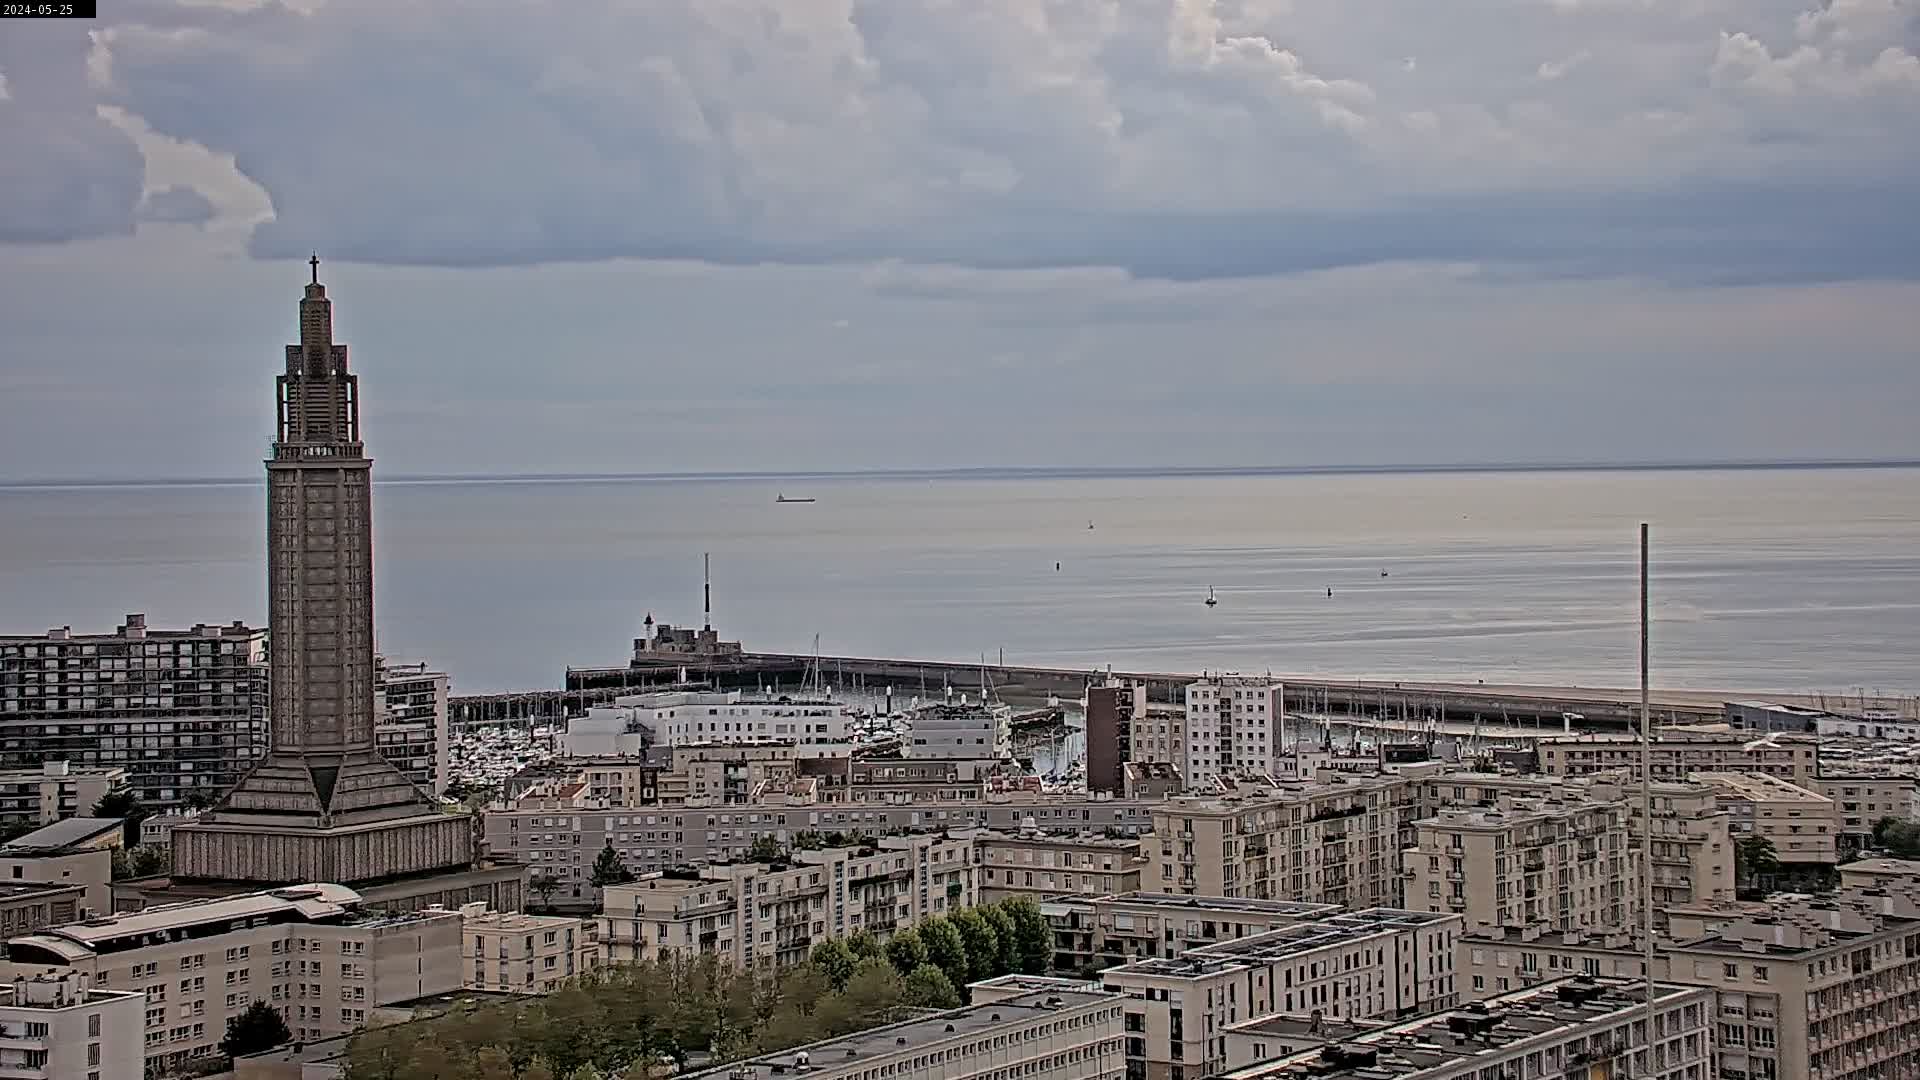 Le Havre Do. 18:10